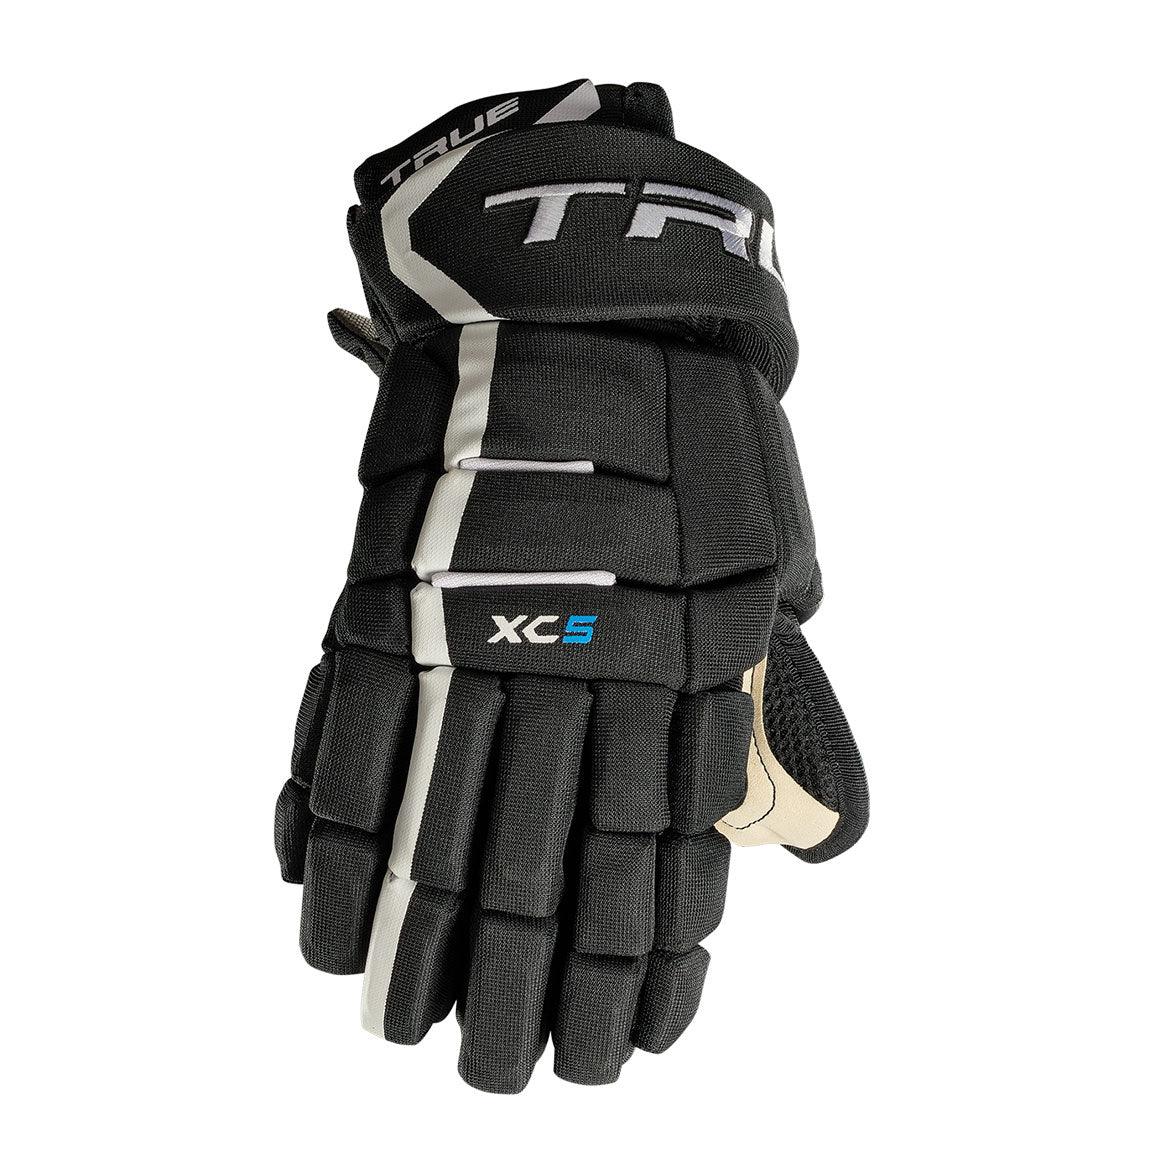 XC5 2020 Tapered Glove - Senior - Sports Excellence